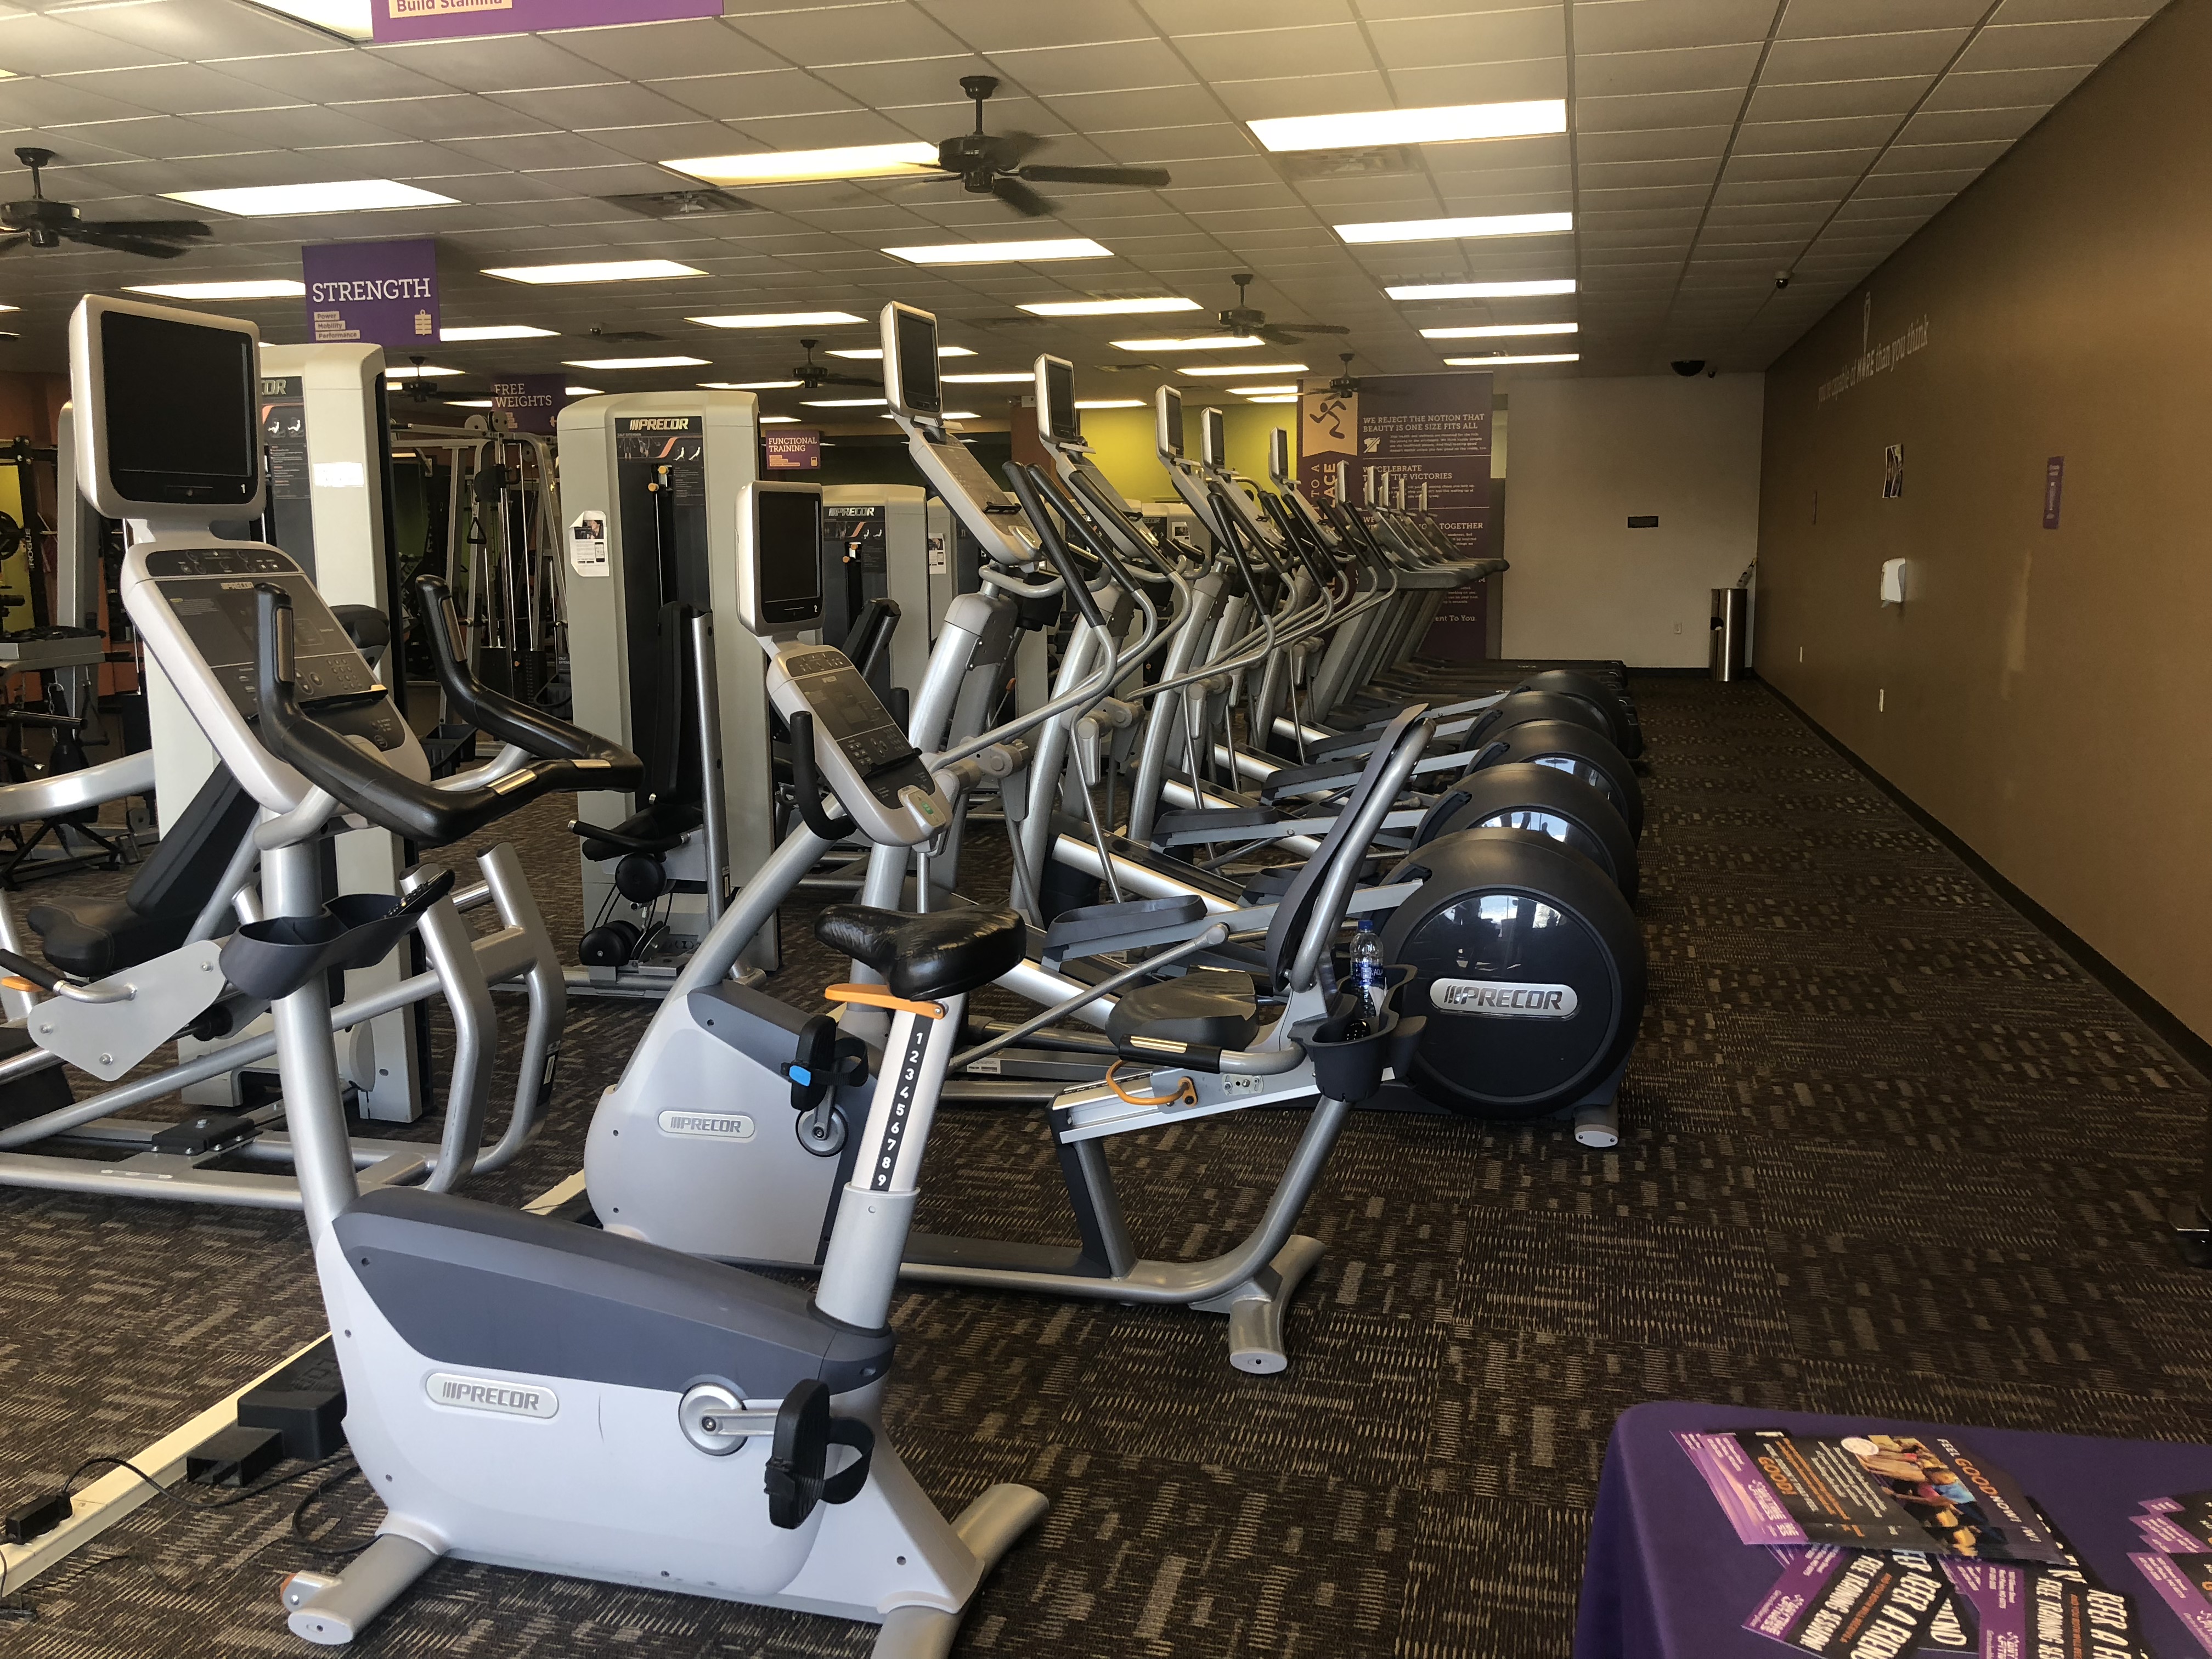 30 Minute How Much Does It Cost To Get A Membership At Anytime Fitness for Women